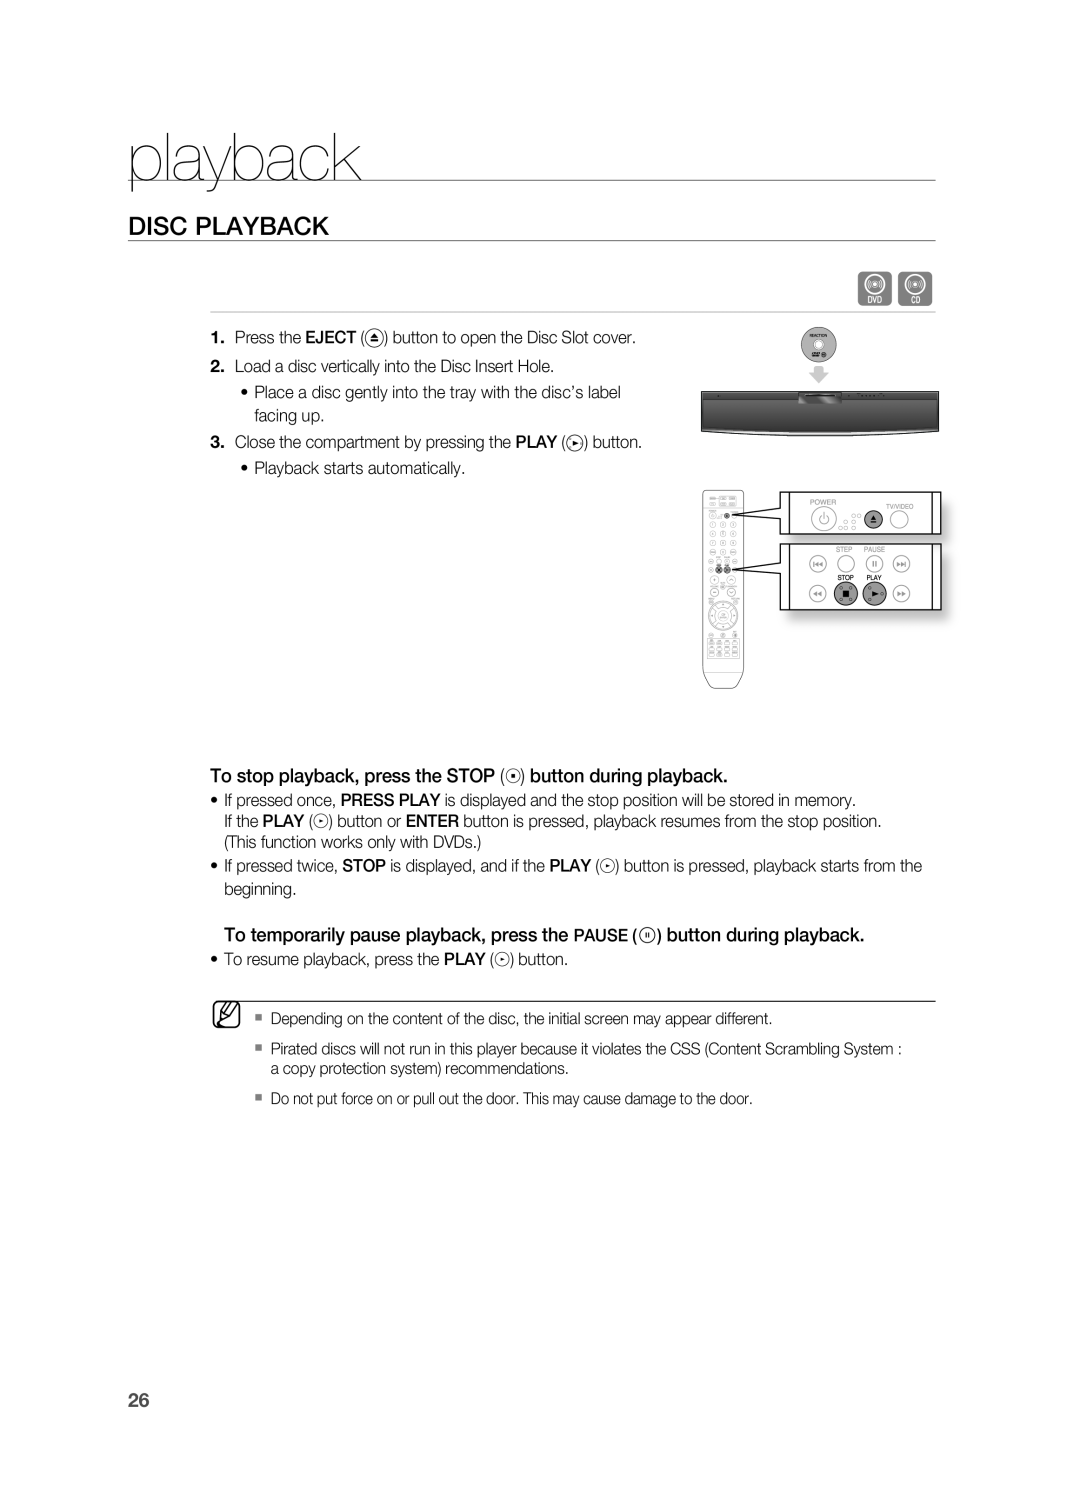 Sony HT-X810 user manual playback, DISC PlAYBACK 